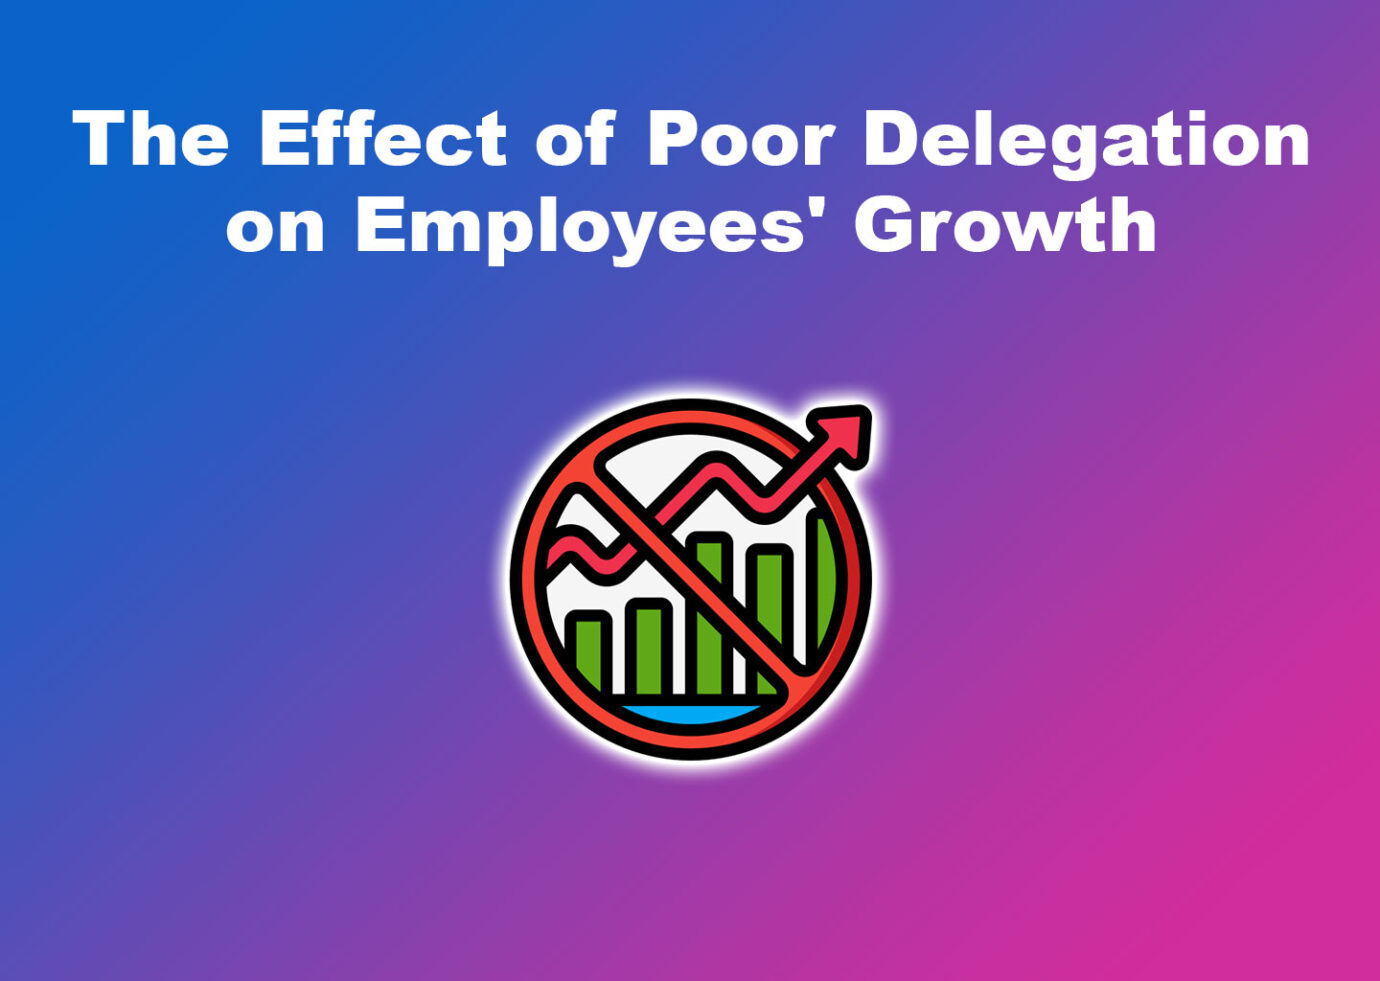 The Effect of Poor Delegation on Employees' Growth